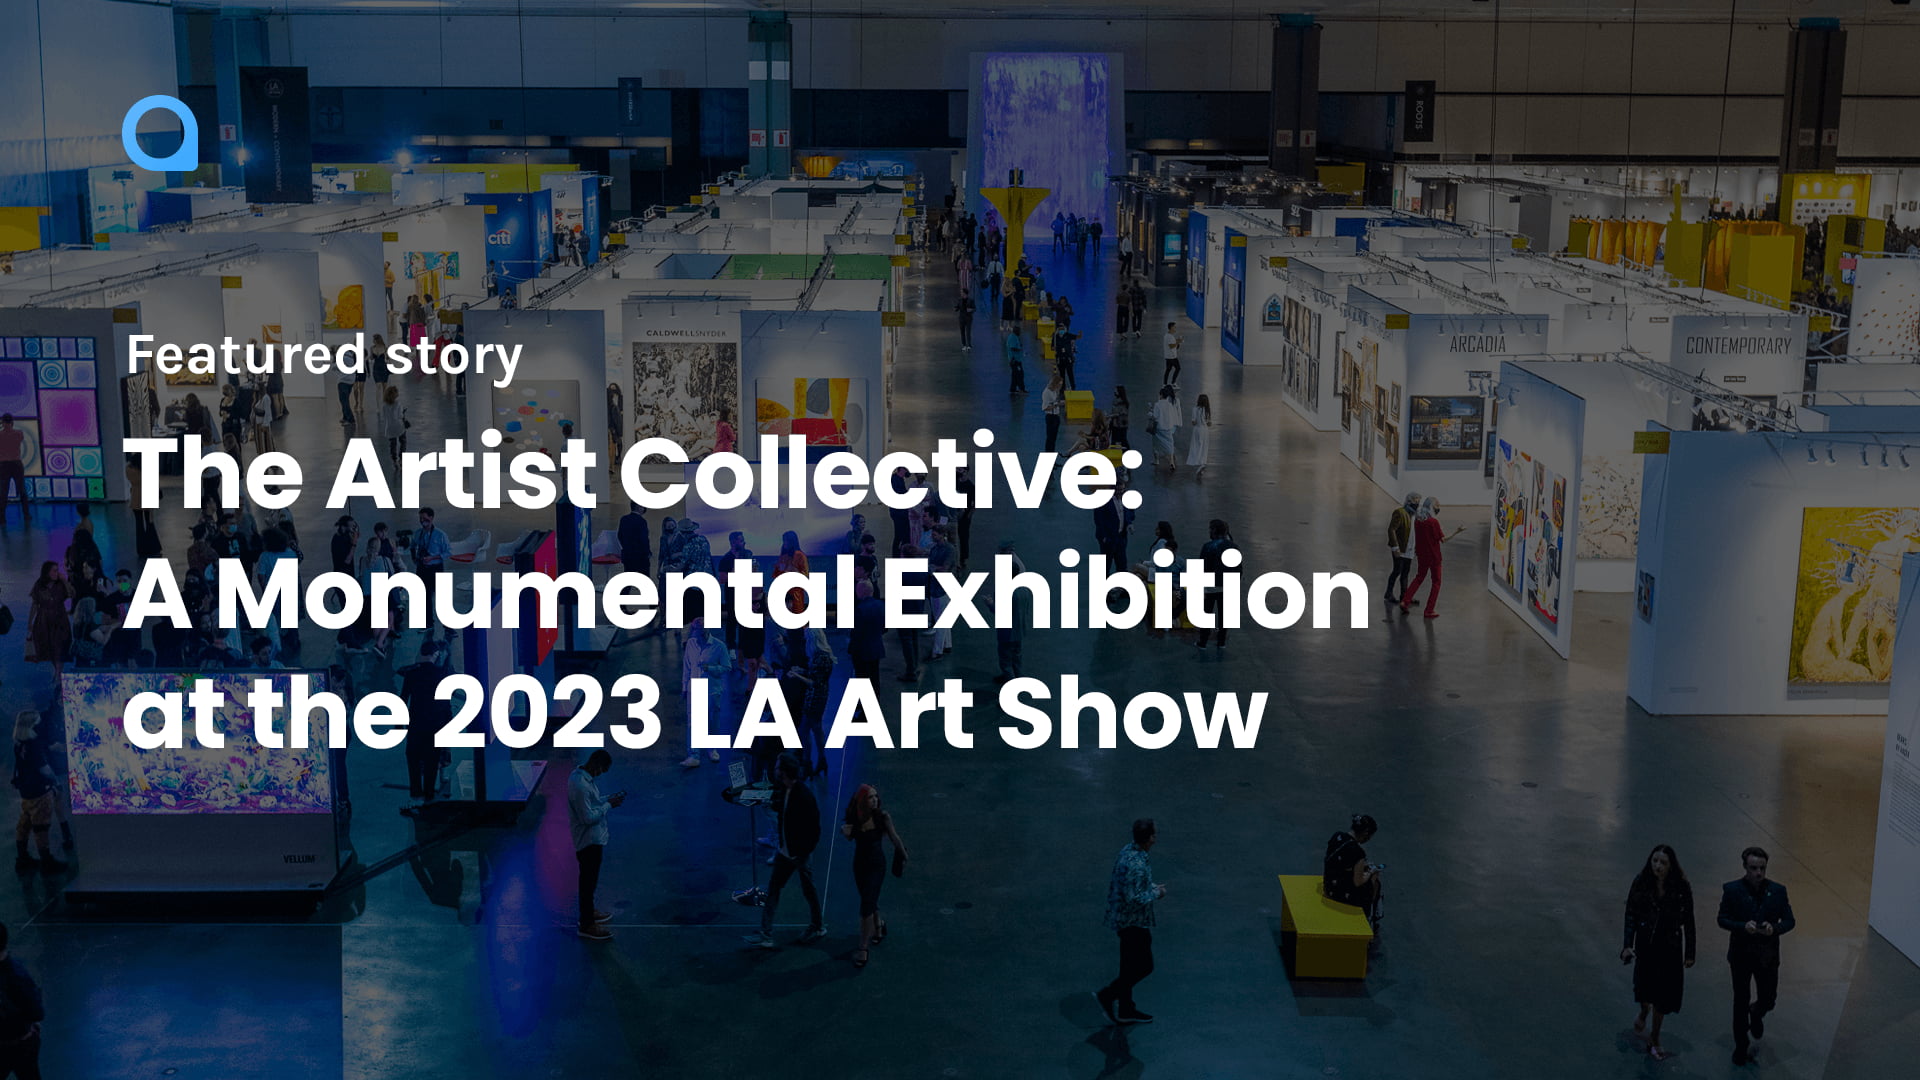 The Artist Collective: A Monumental Exhibition at the 2023 LA Art Show